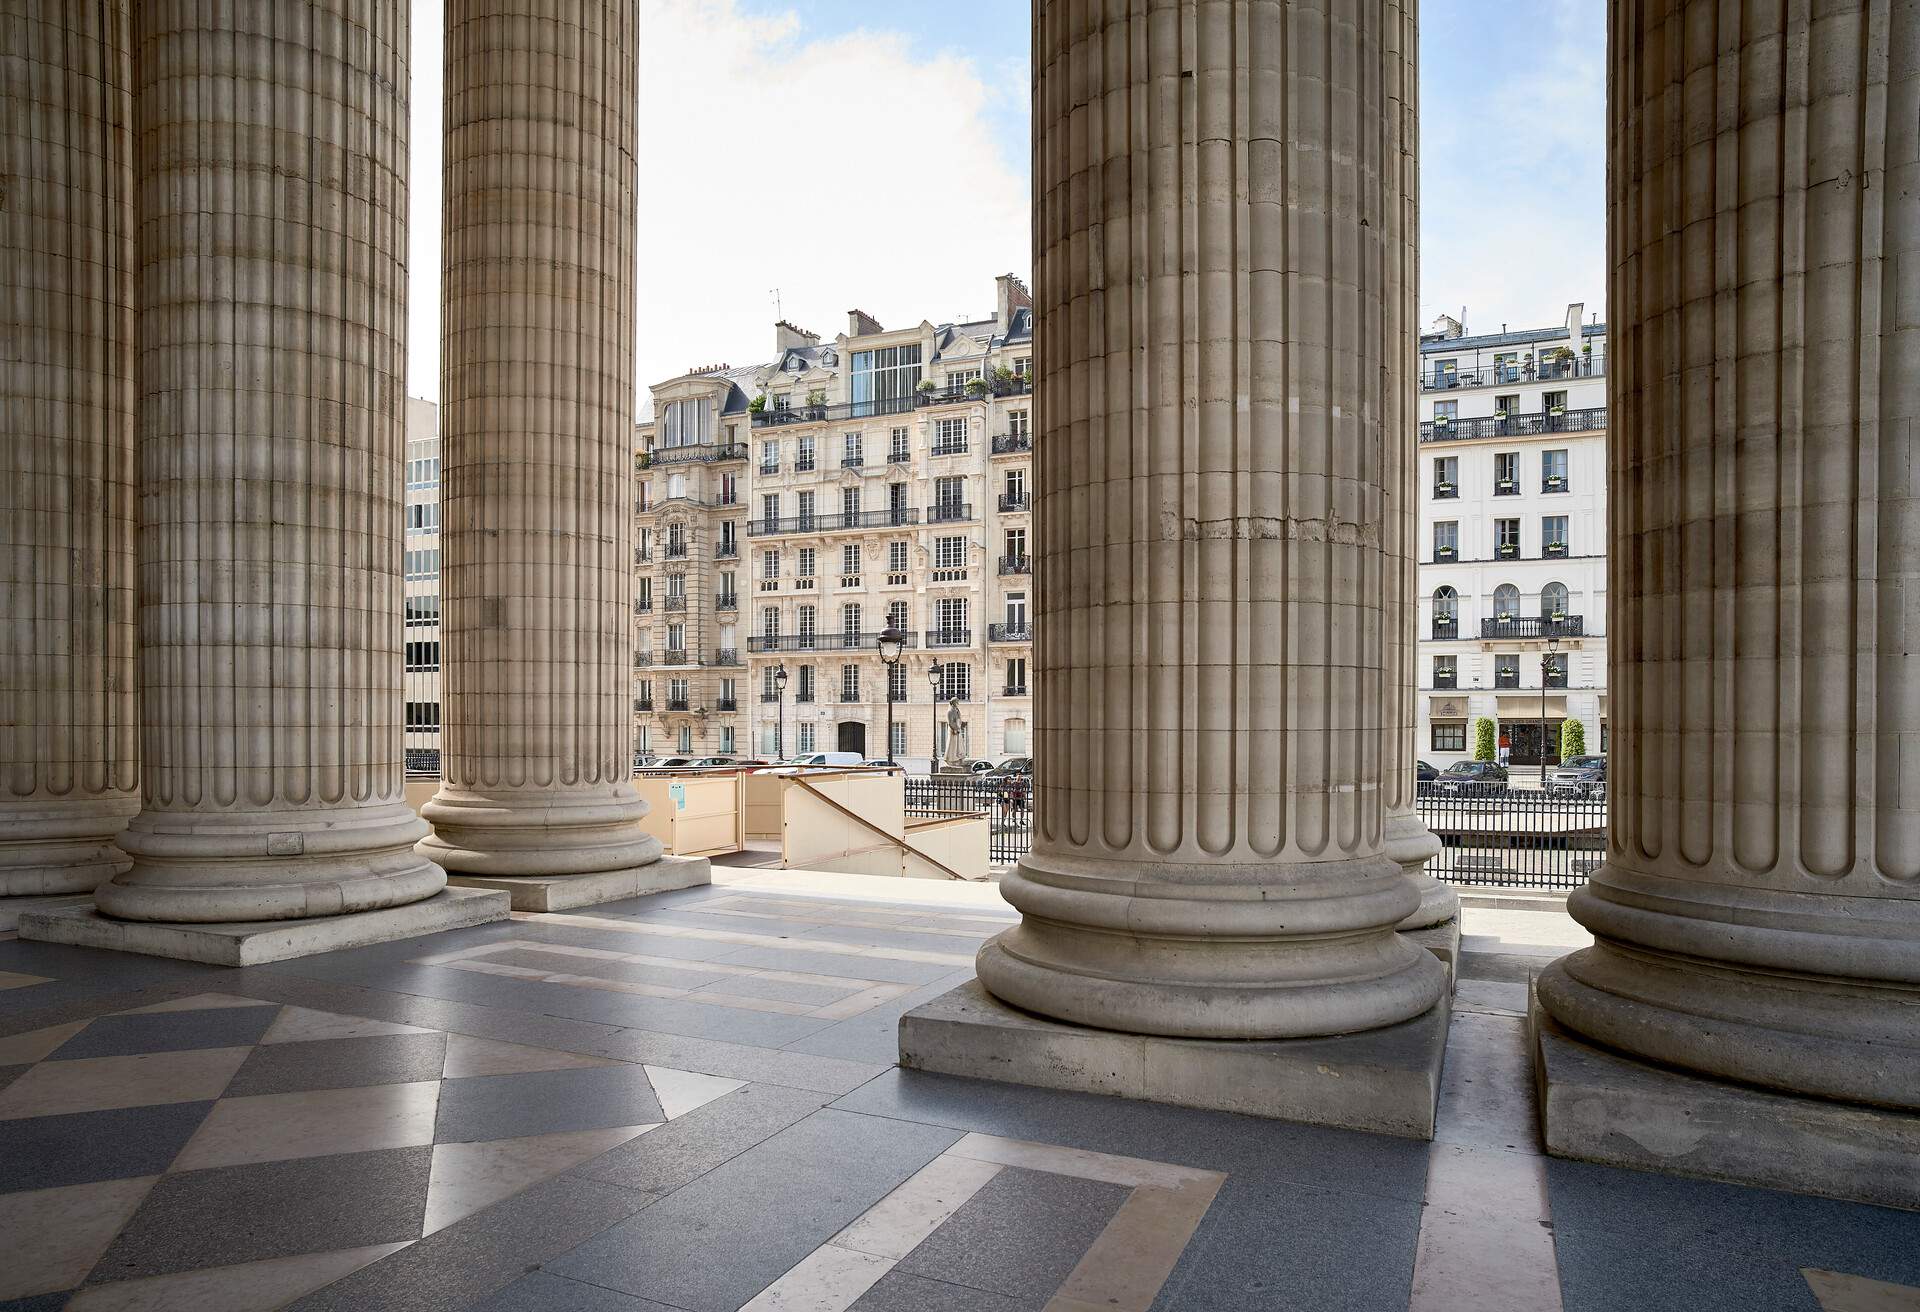 A look at some french haussmannian buildings through some big columns at the Pantheon in Paris 